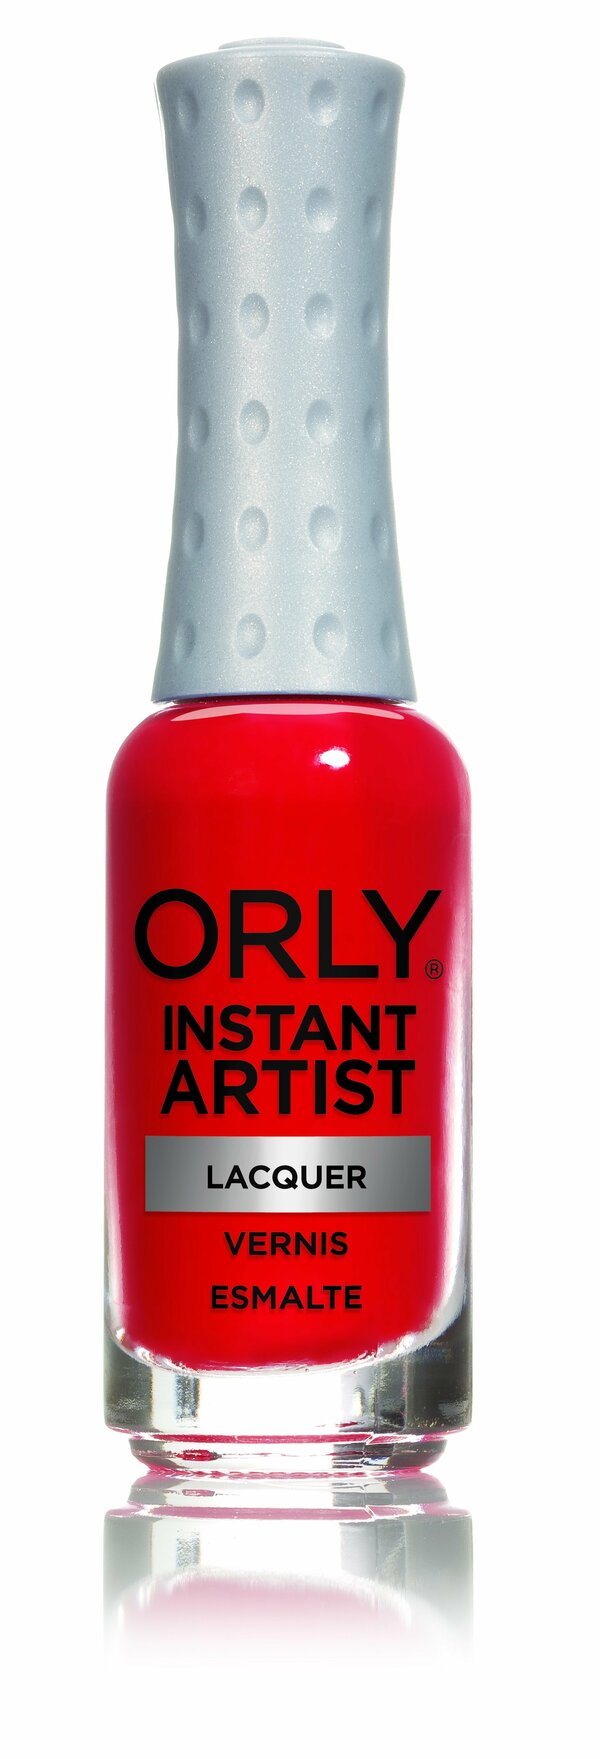 Nail polish swatch / manicure of shade Orly Fiery Red